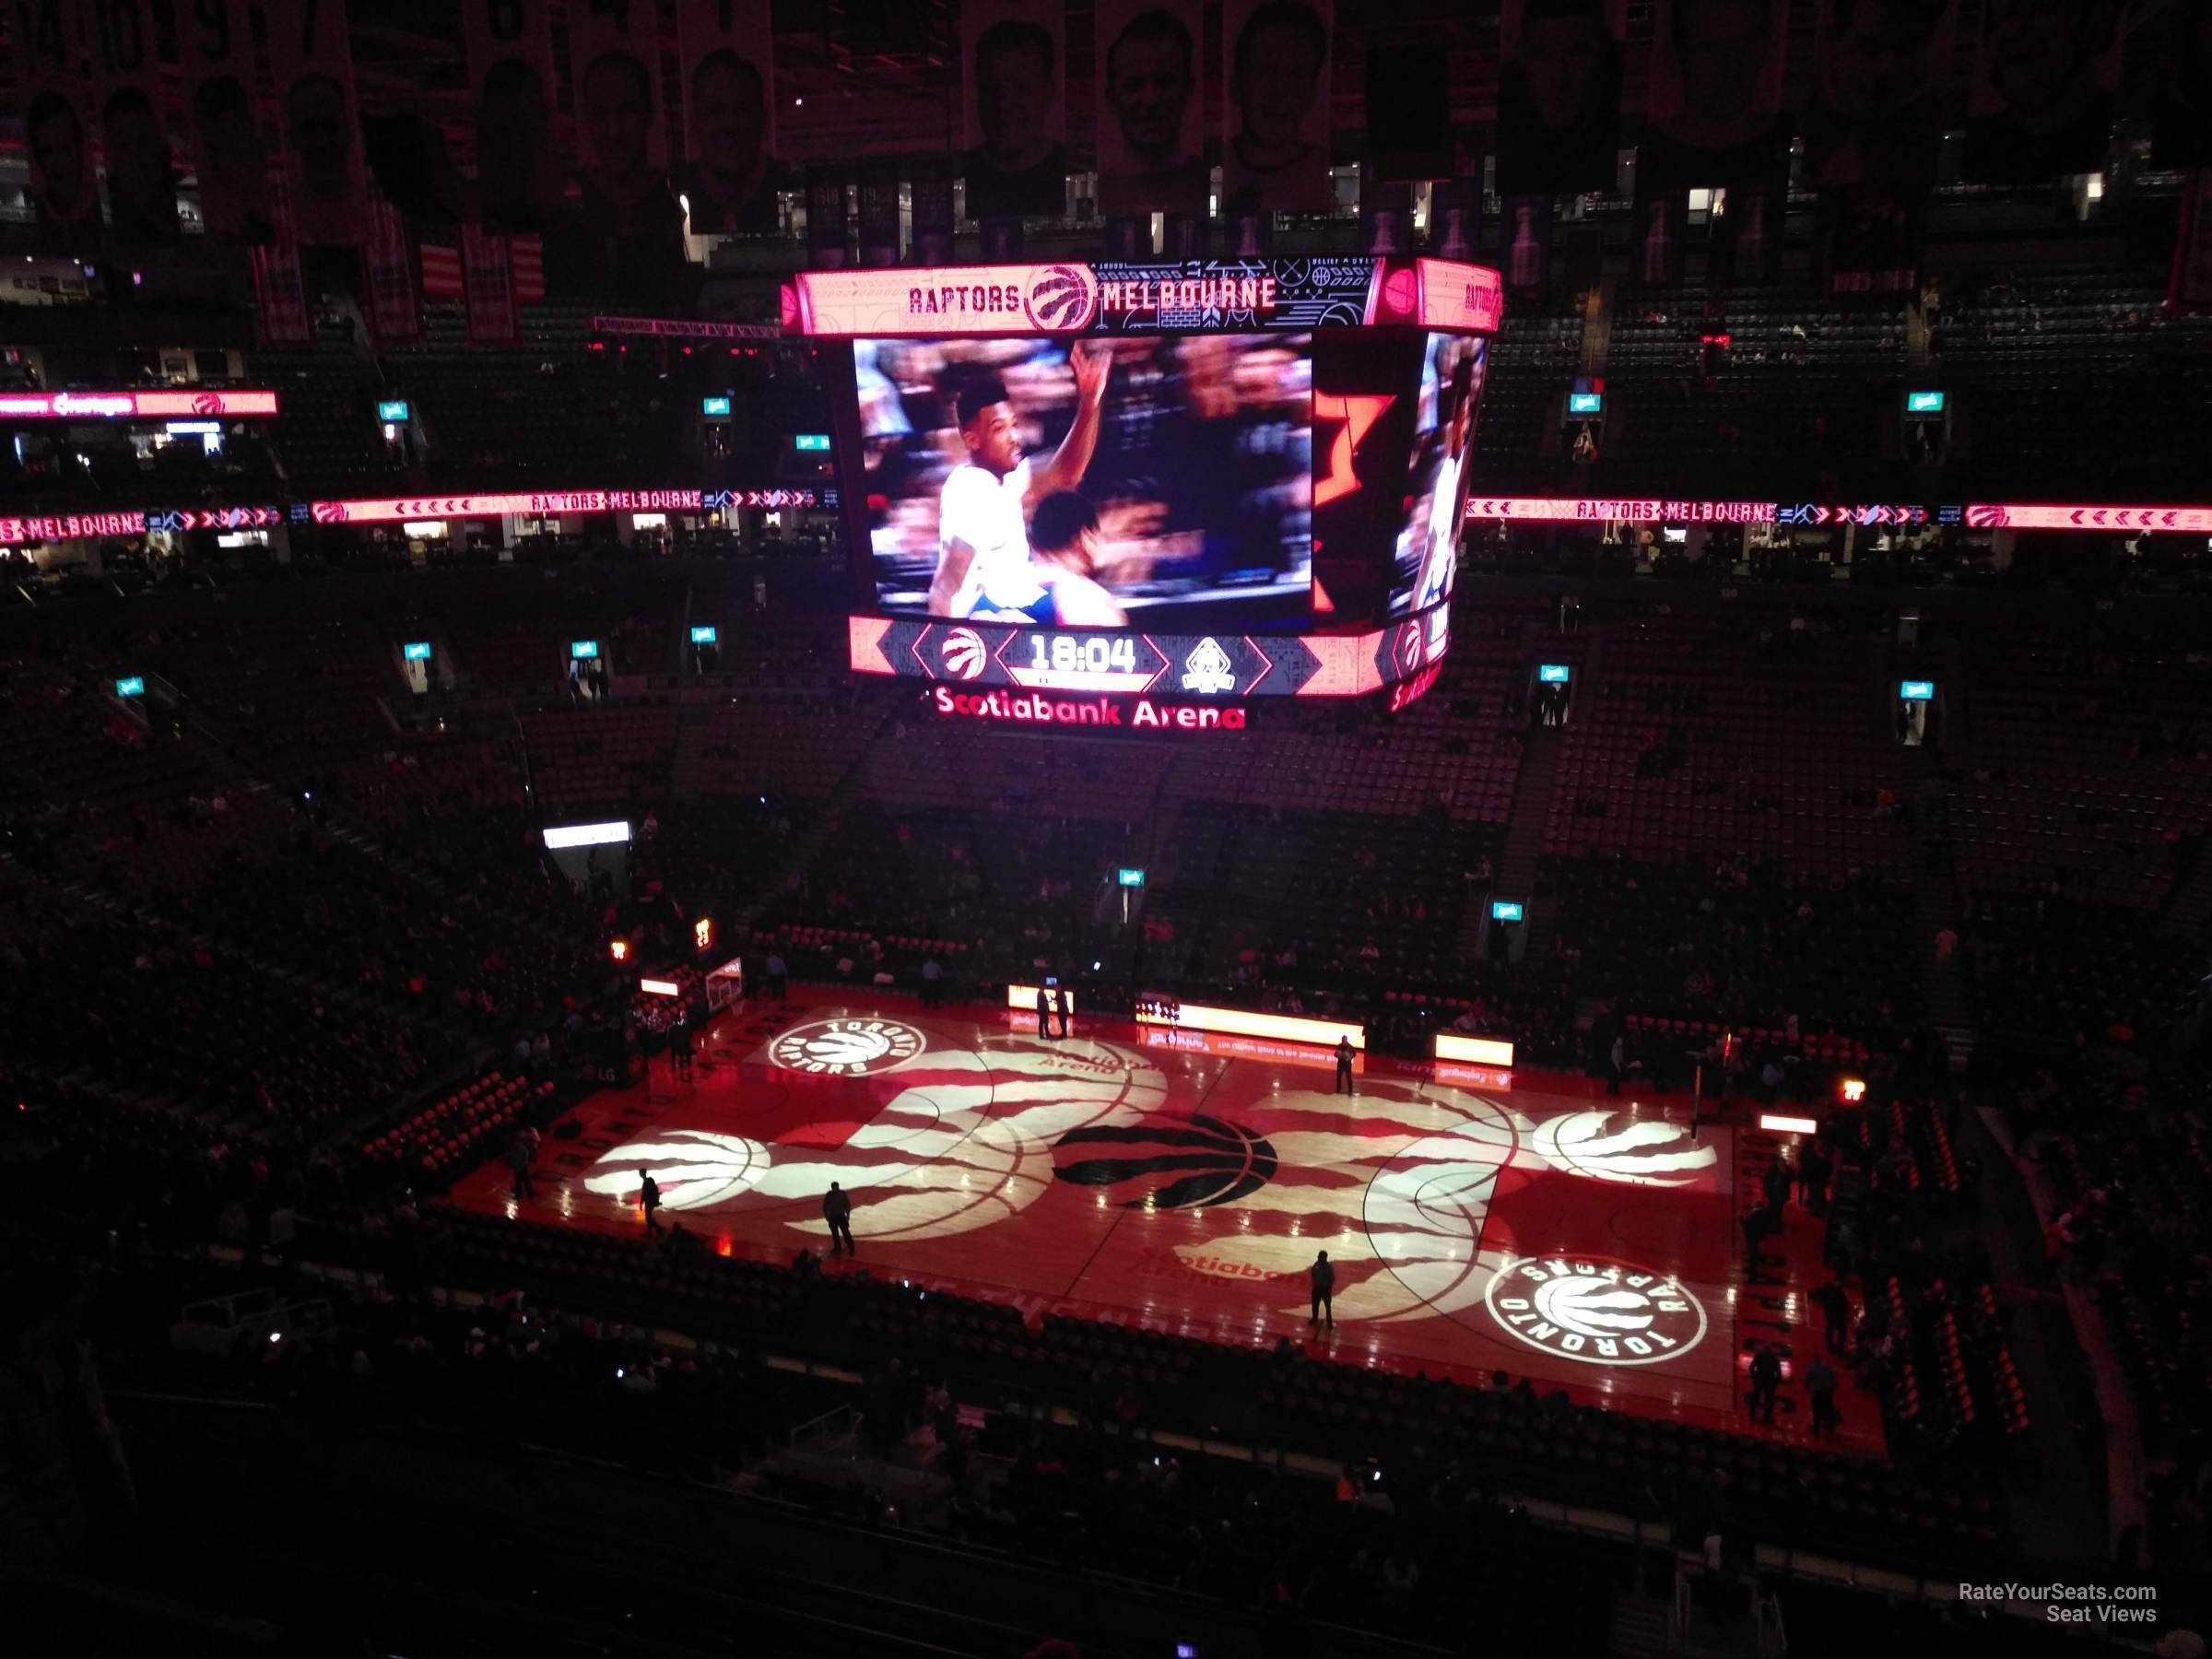 section 308, row 7 seat view  for basketball - scotiabank arena